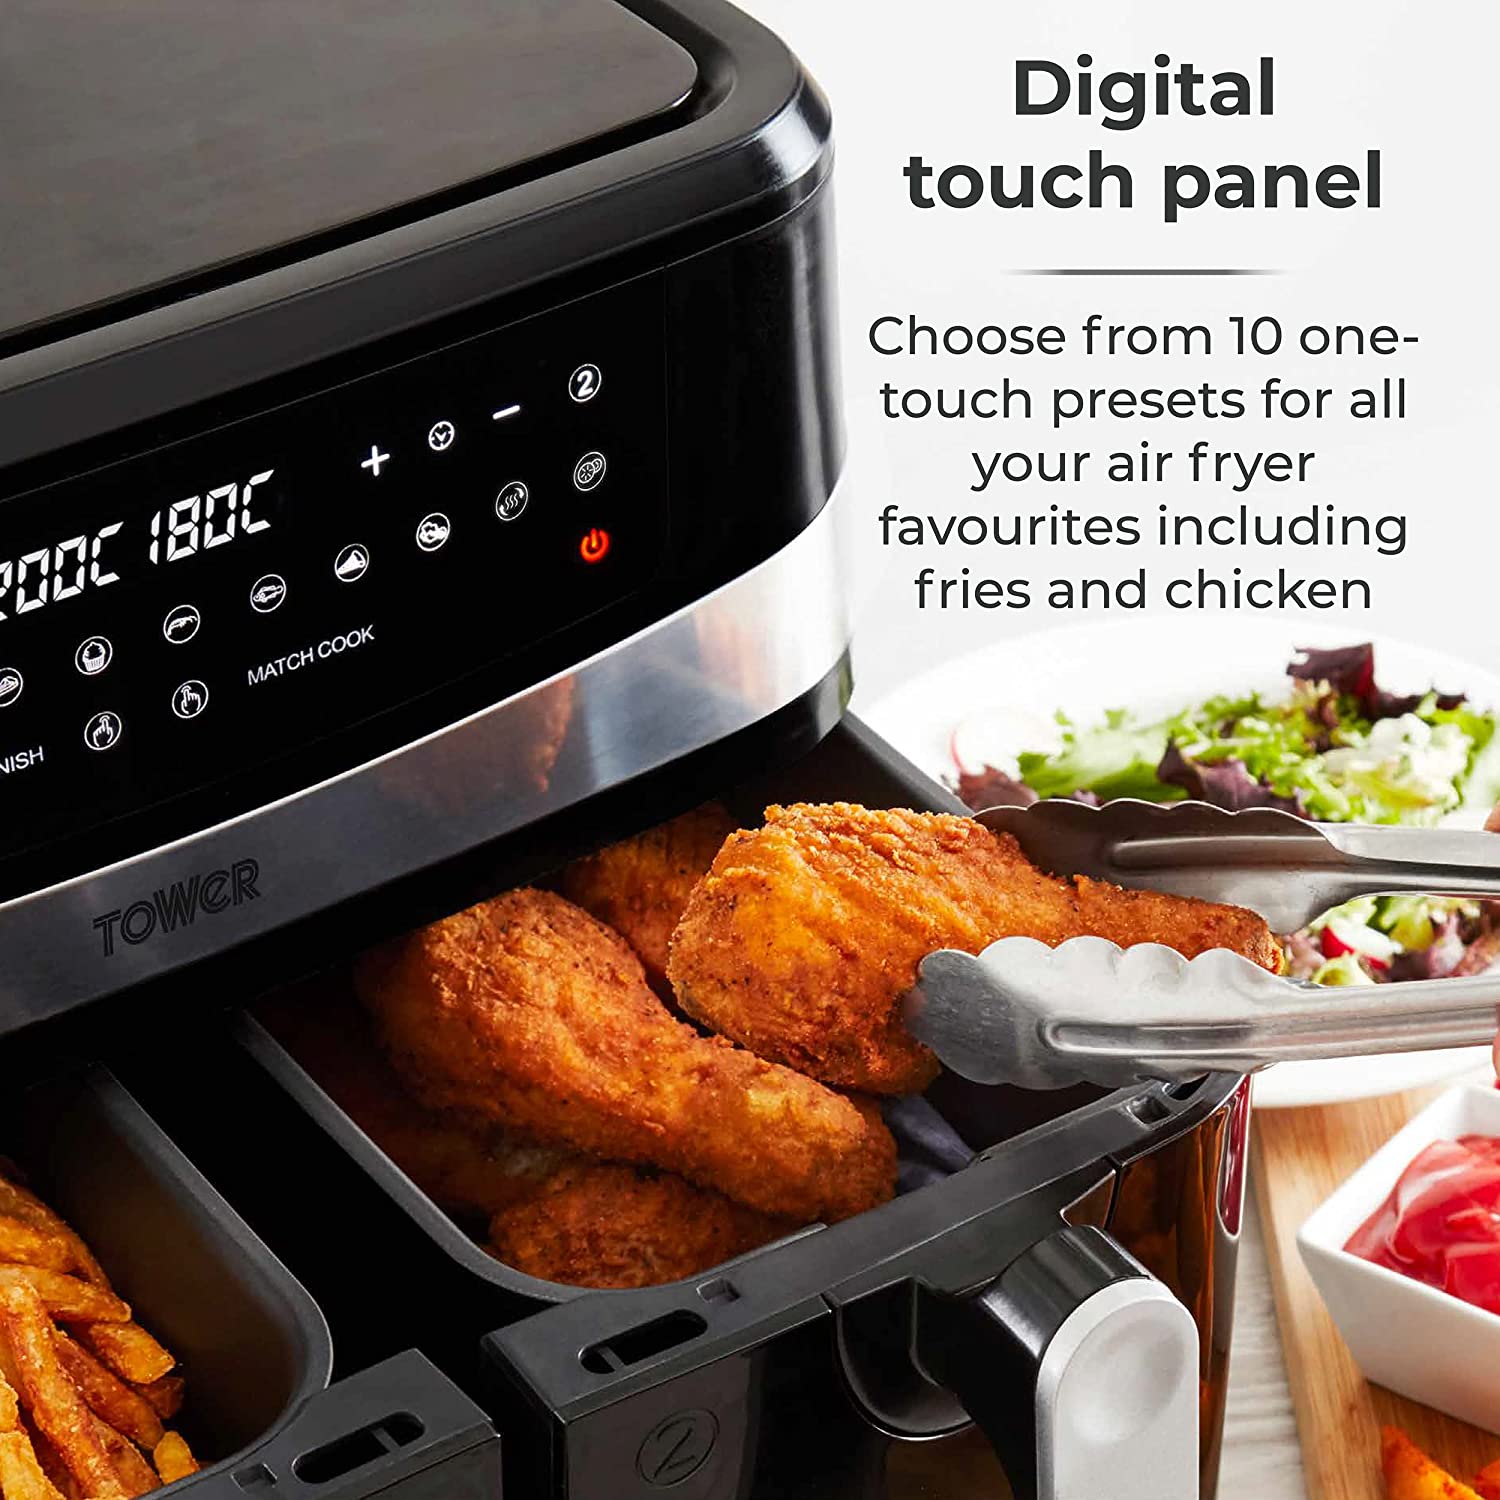 New Tower Vortx 9L Duo Basket Air Fryer for sale in Co. Mayo for €149 on  DoneDeal